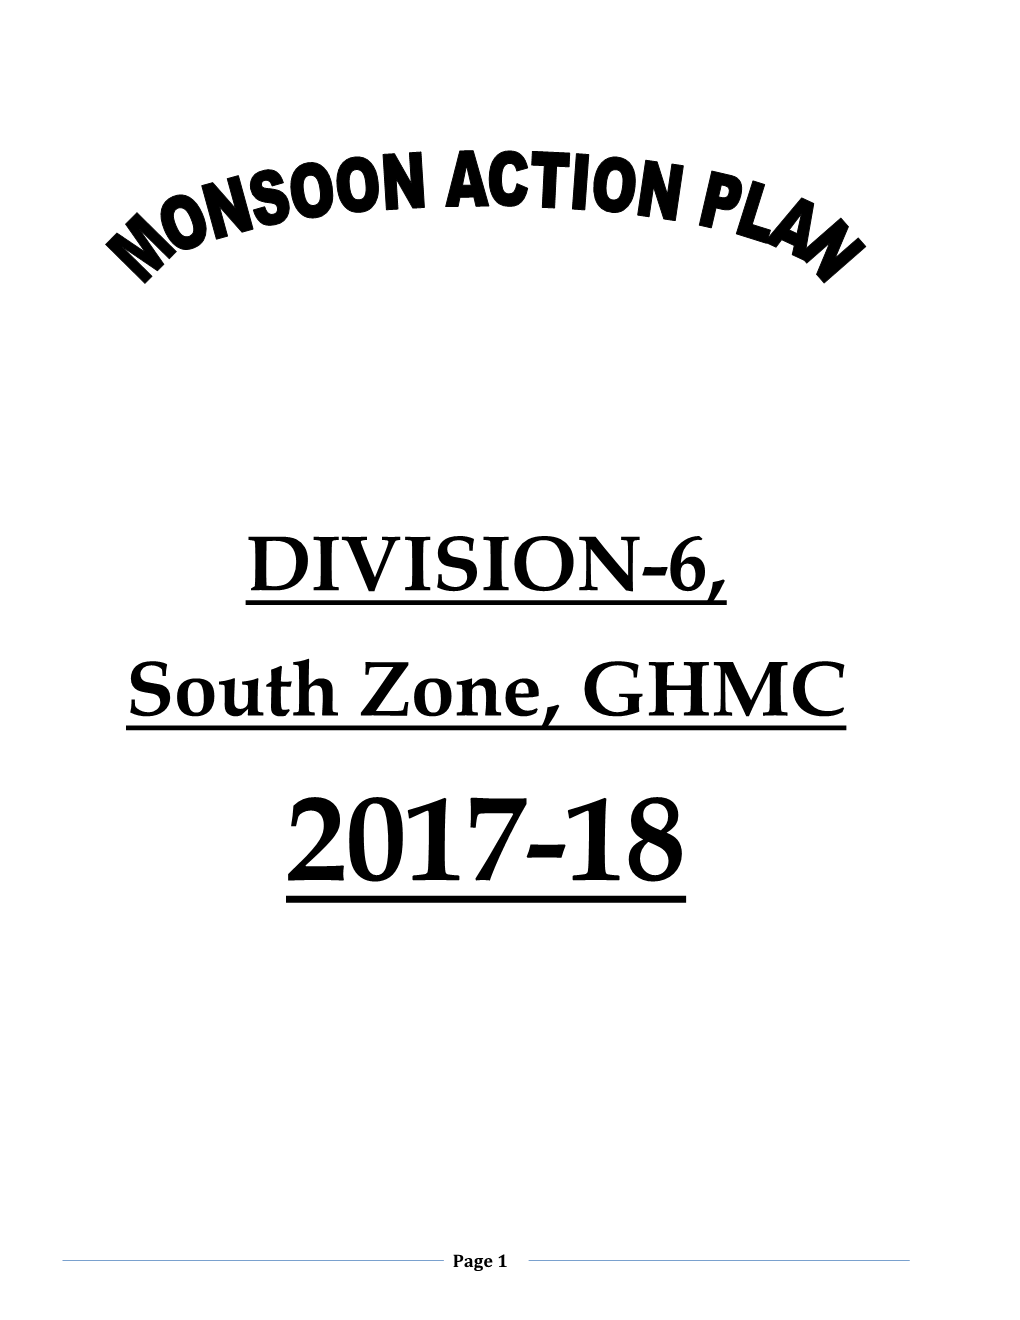 DIVISION-6, South Zone, GHMC 2017-18